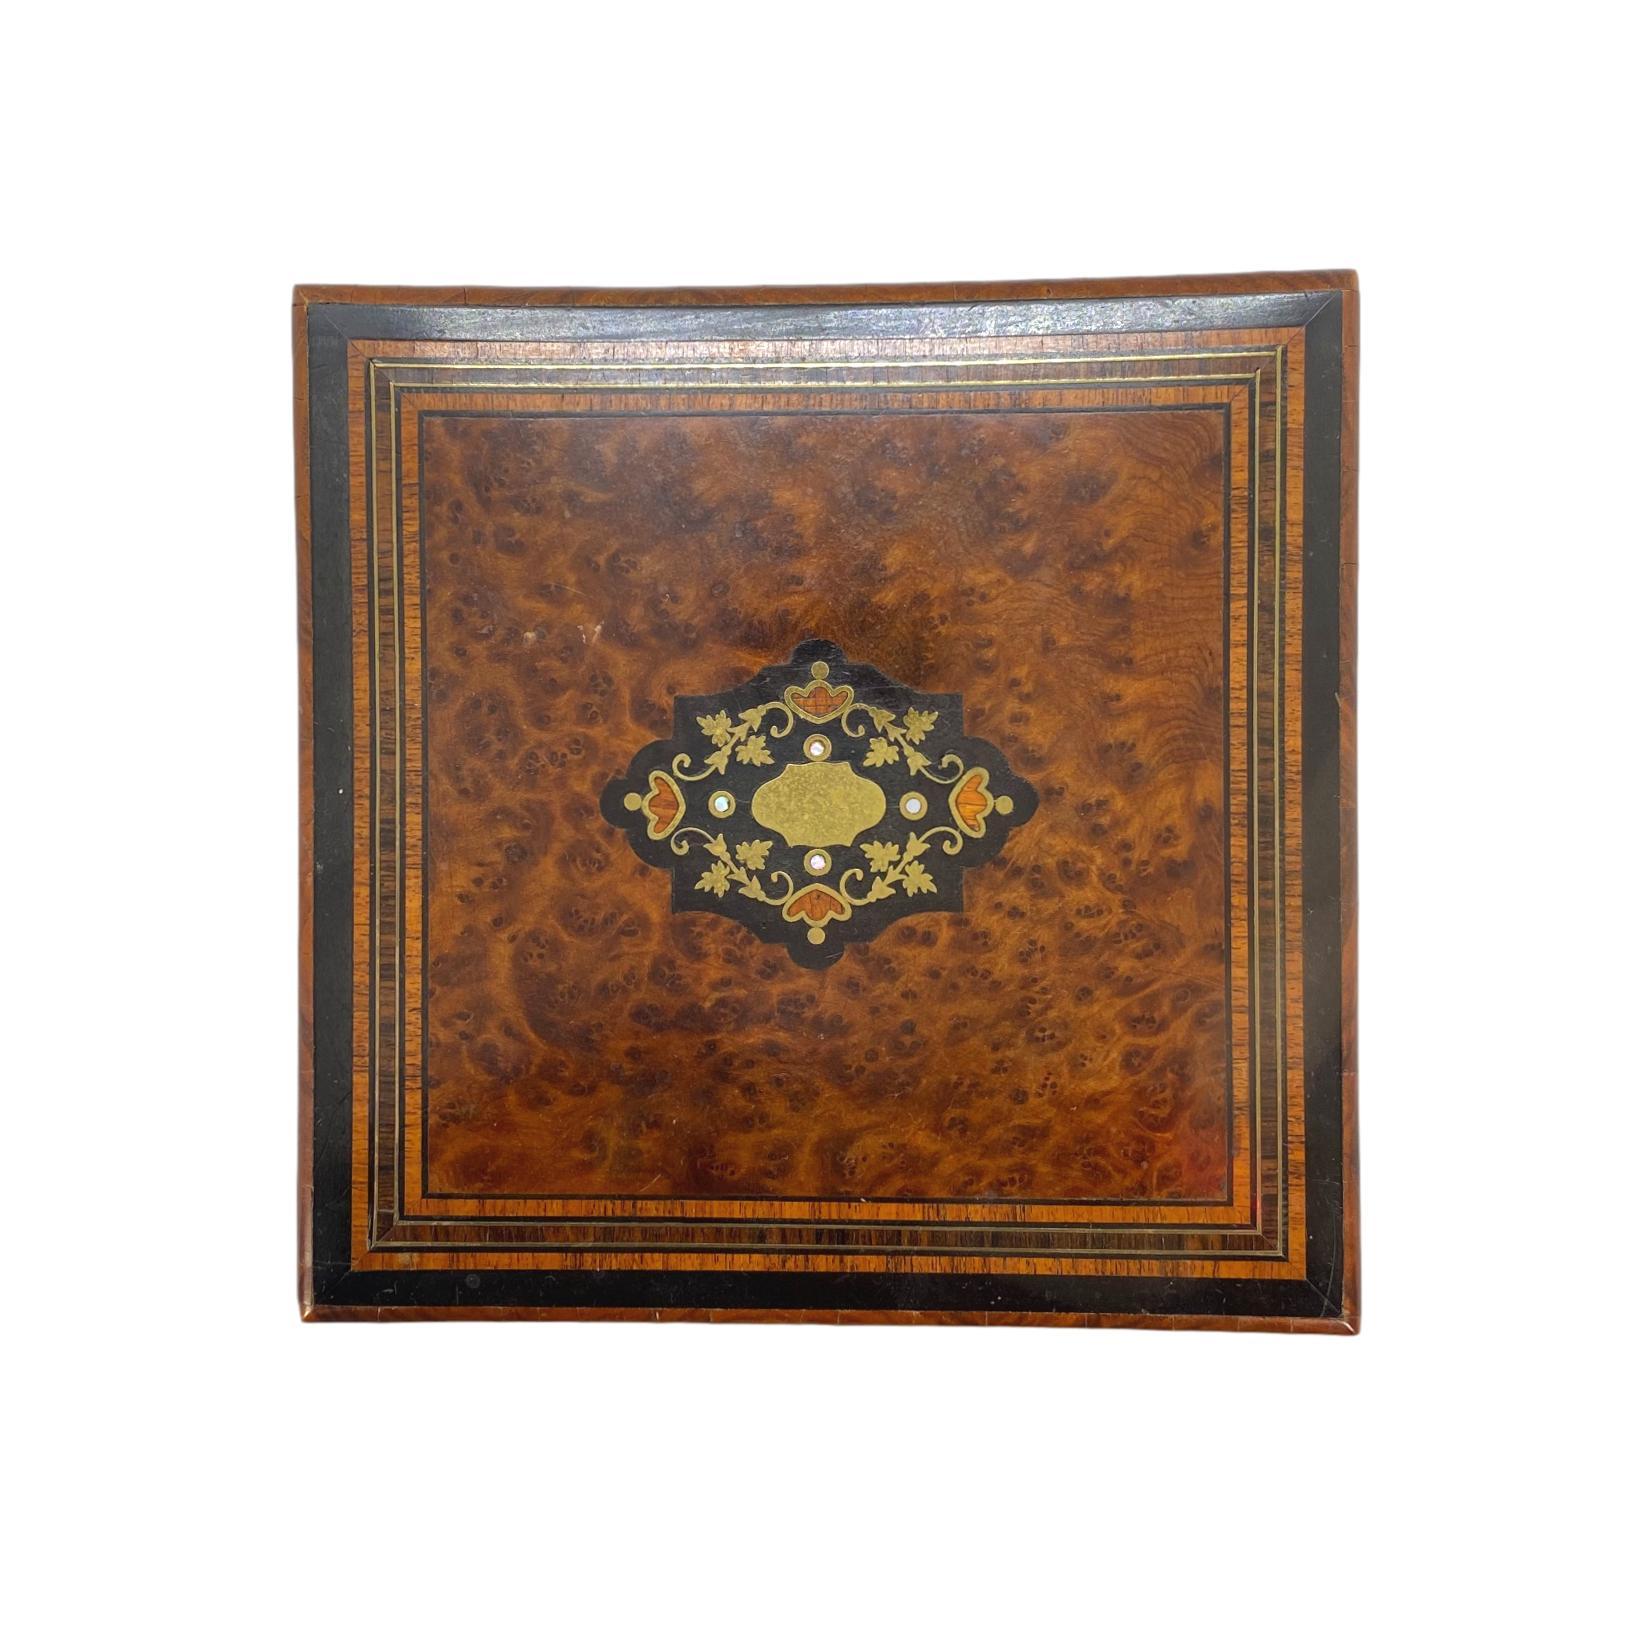 Belle Époque burl walnut box with intricately inlaid brass, ebony, and exotic woods, French, circa 1880. The highly figured burl walnut top chosen to resemble tortoise-shell.

  